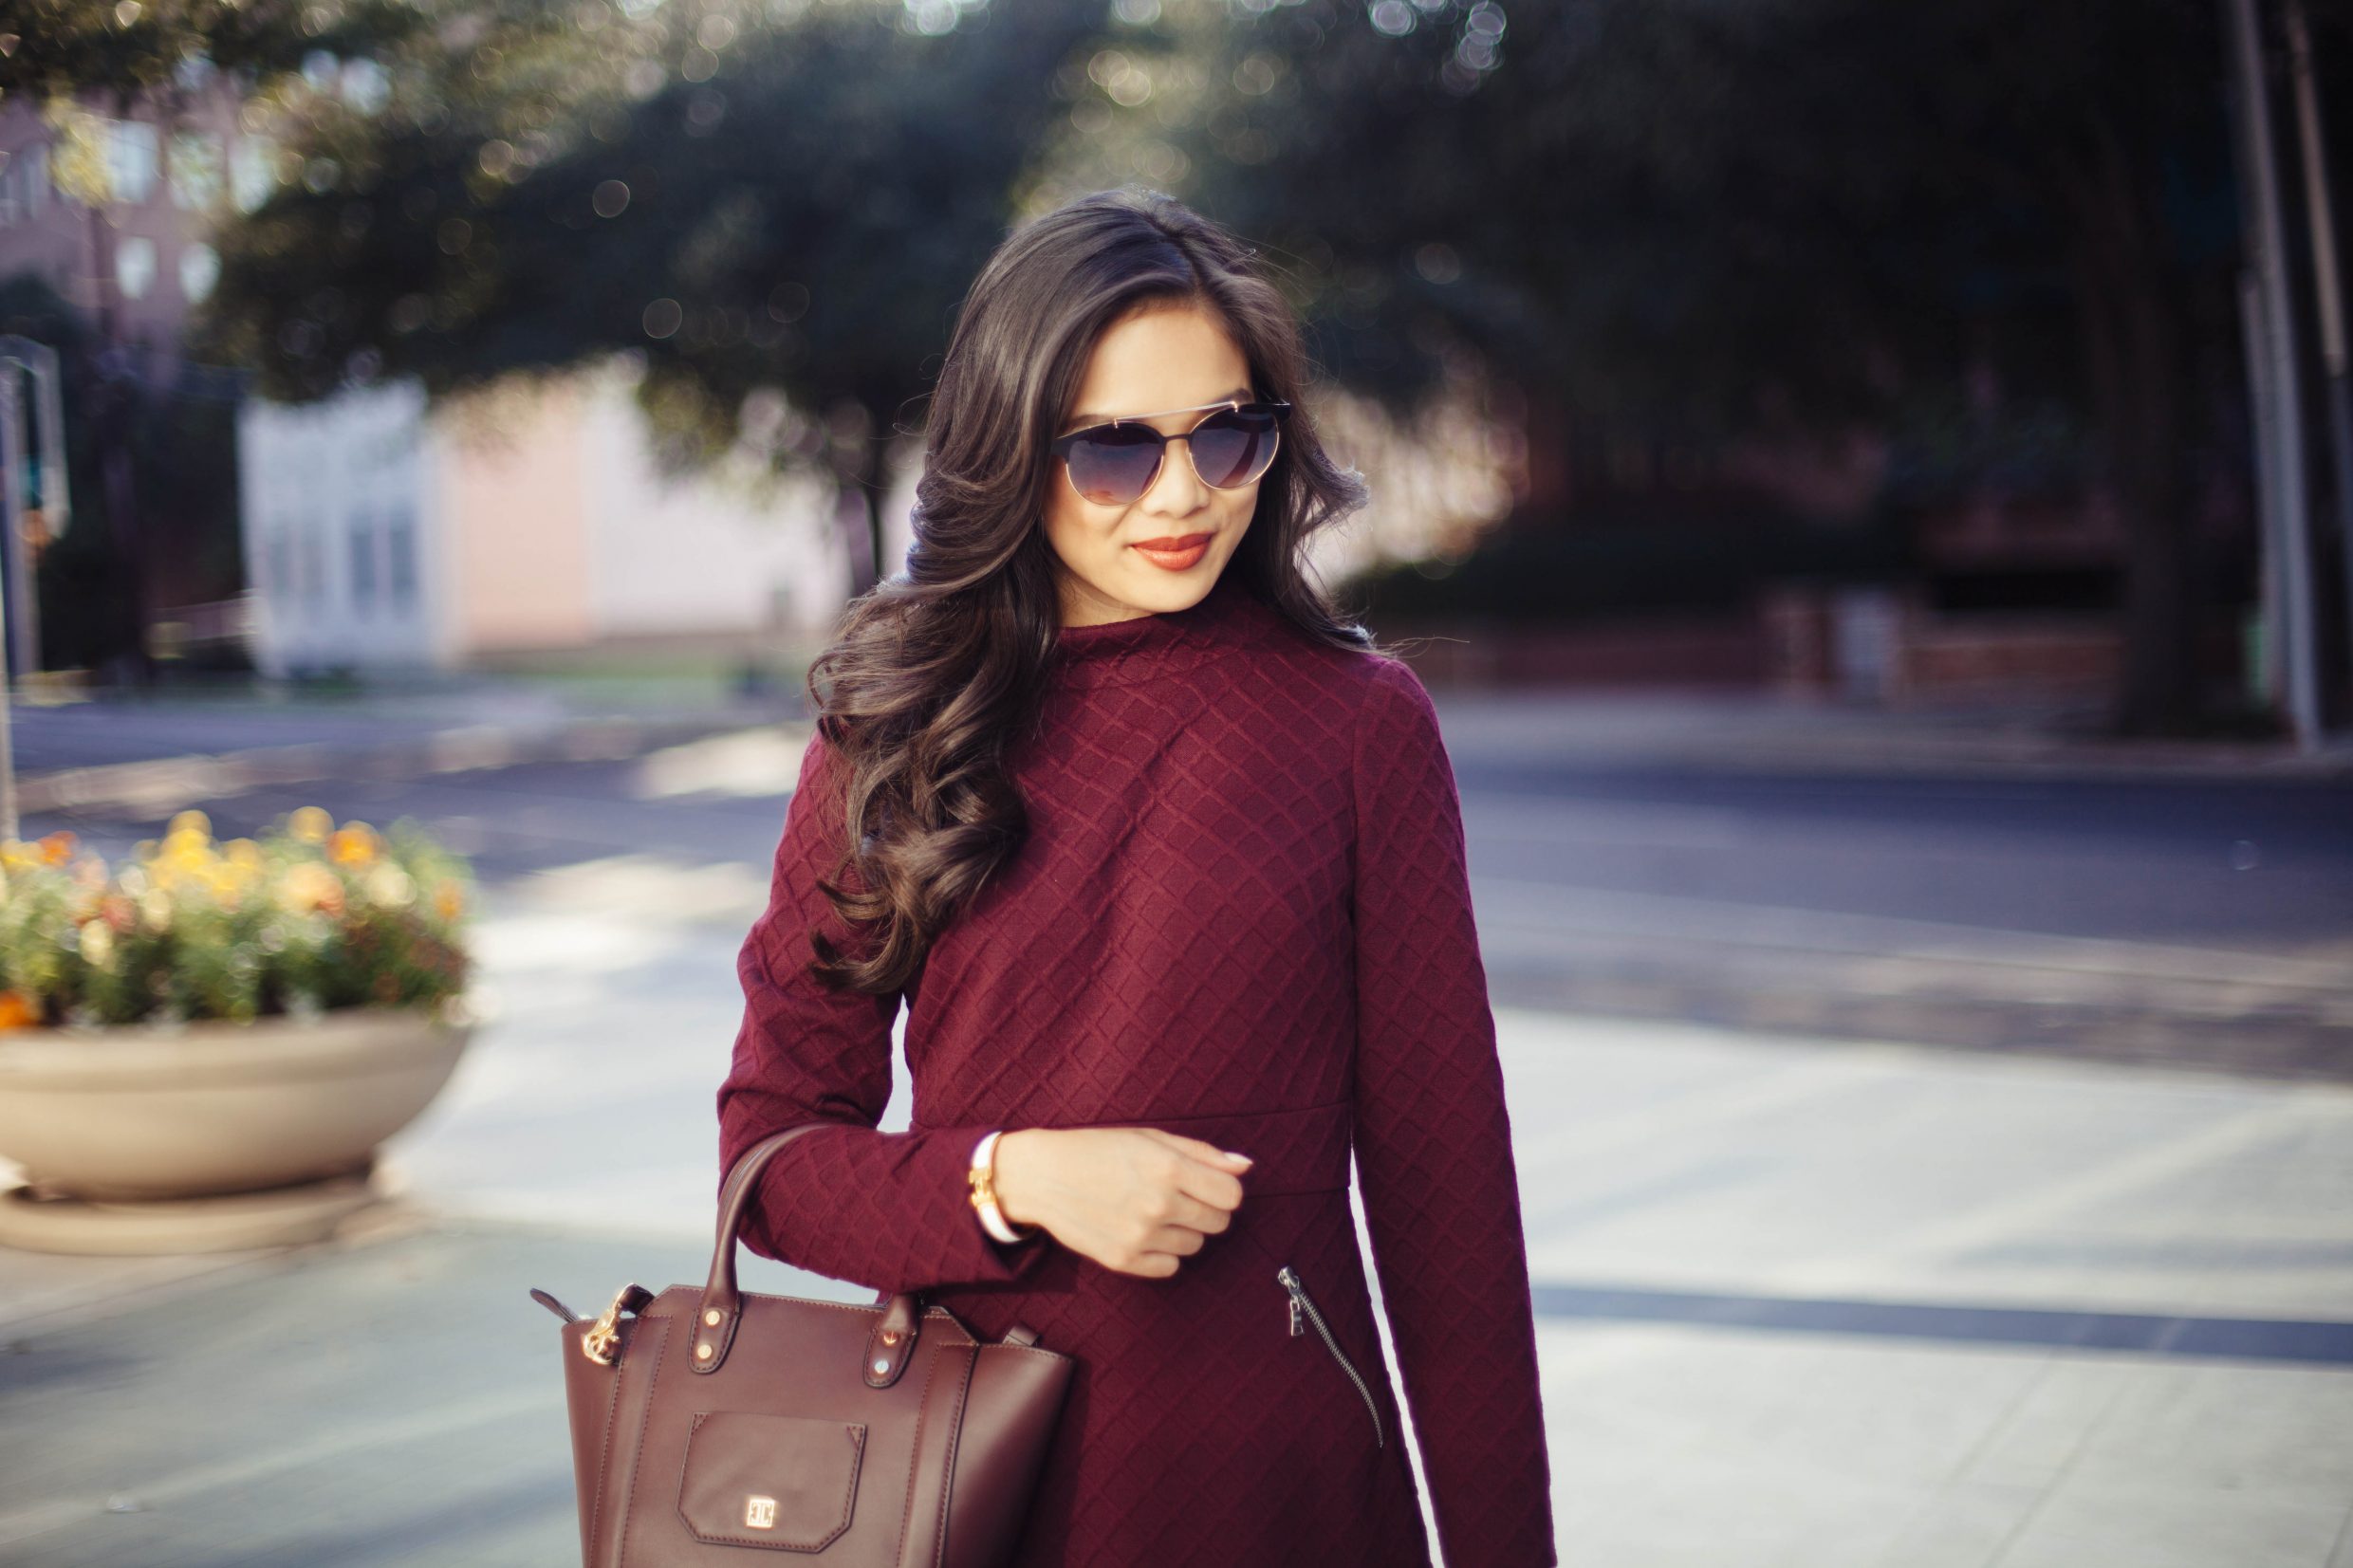 maggy,london,diamond,knit,dress,a,line,dress,ellen,fit,and,flare,sweater,burgundy,dark,cherry,maroon,fall,fashion,style,work,office,with,pockets,zippers,mock,neck,holiday,party,dresses,ivanka,trump,tribeca,satchel,bp,sunglasses,charlotte,olympia,suede,heels,dolly,dallas,uptown,